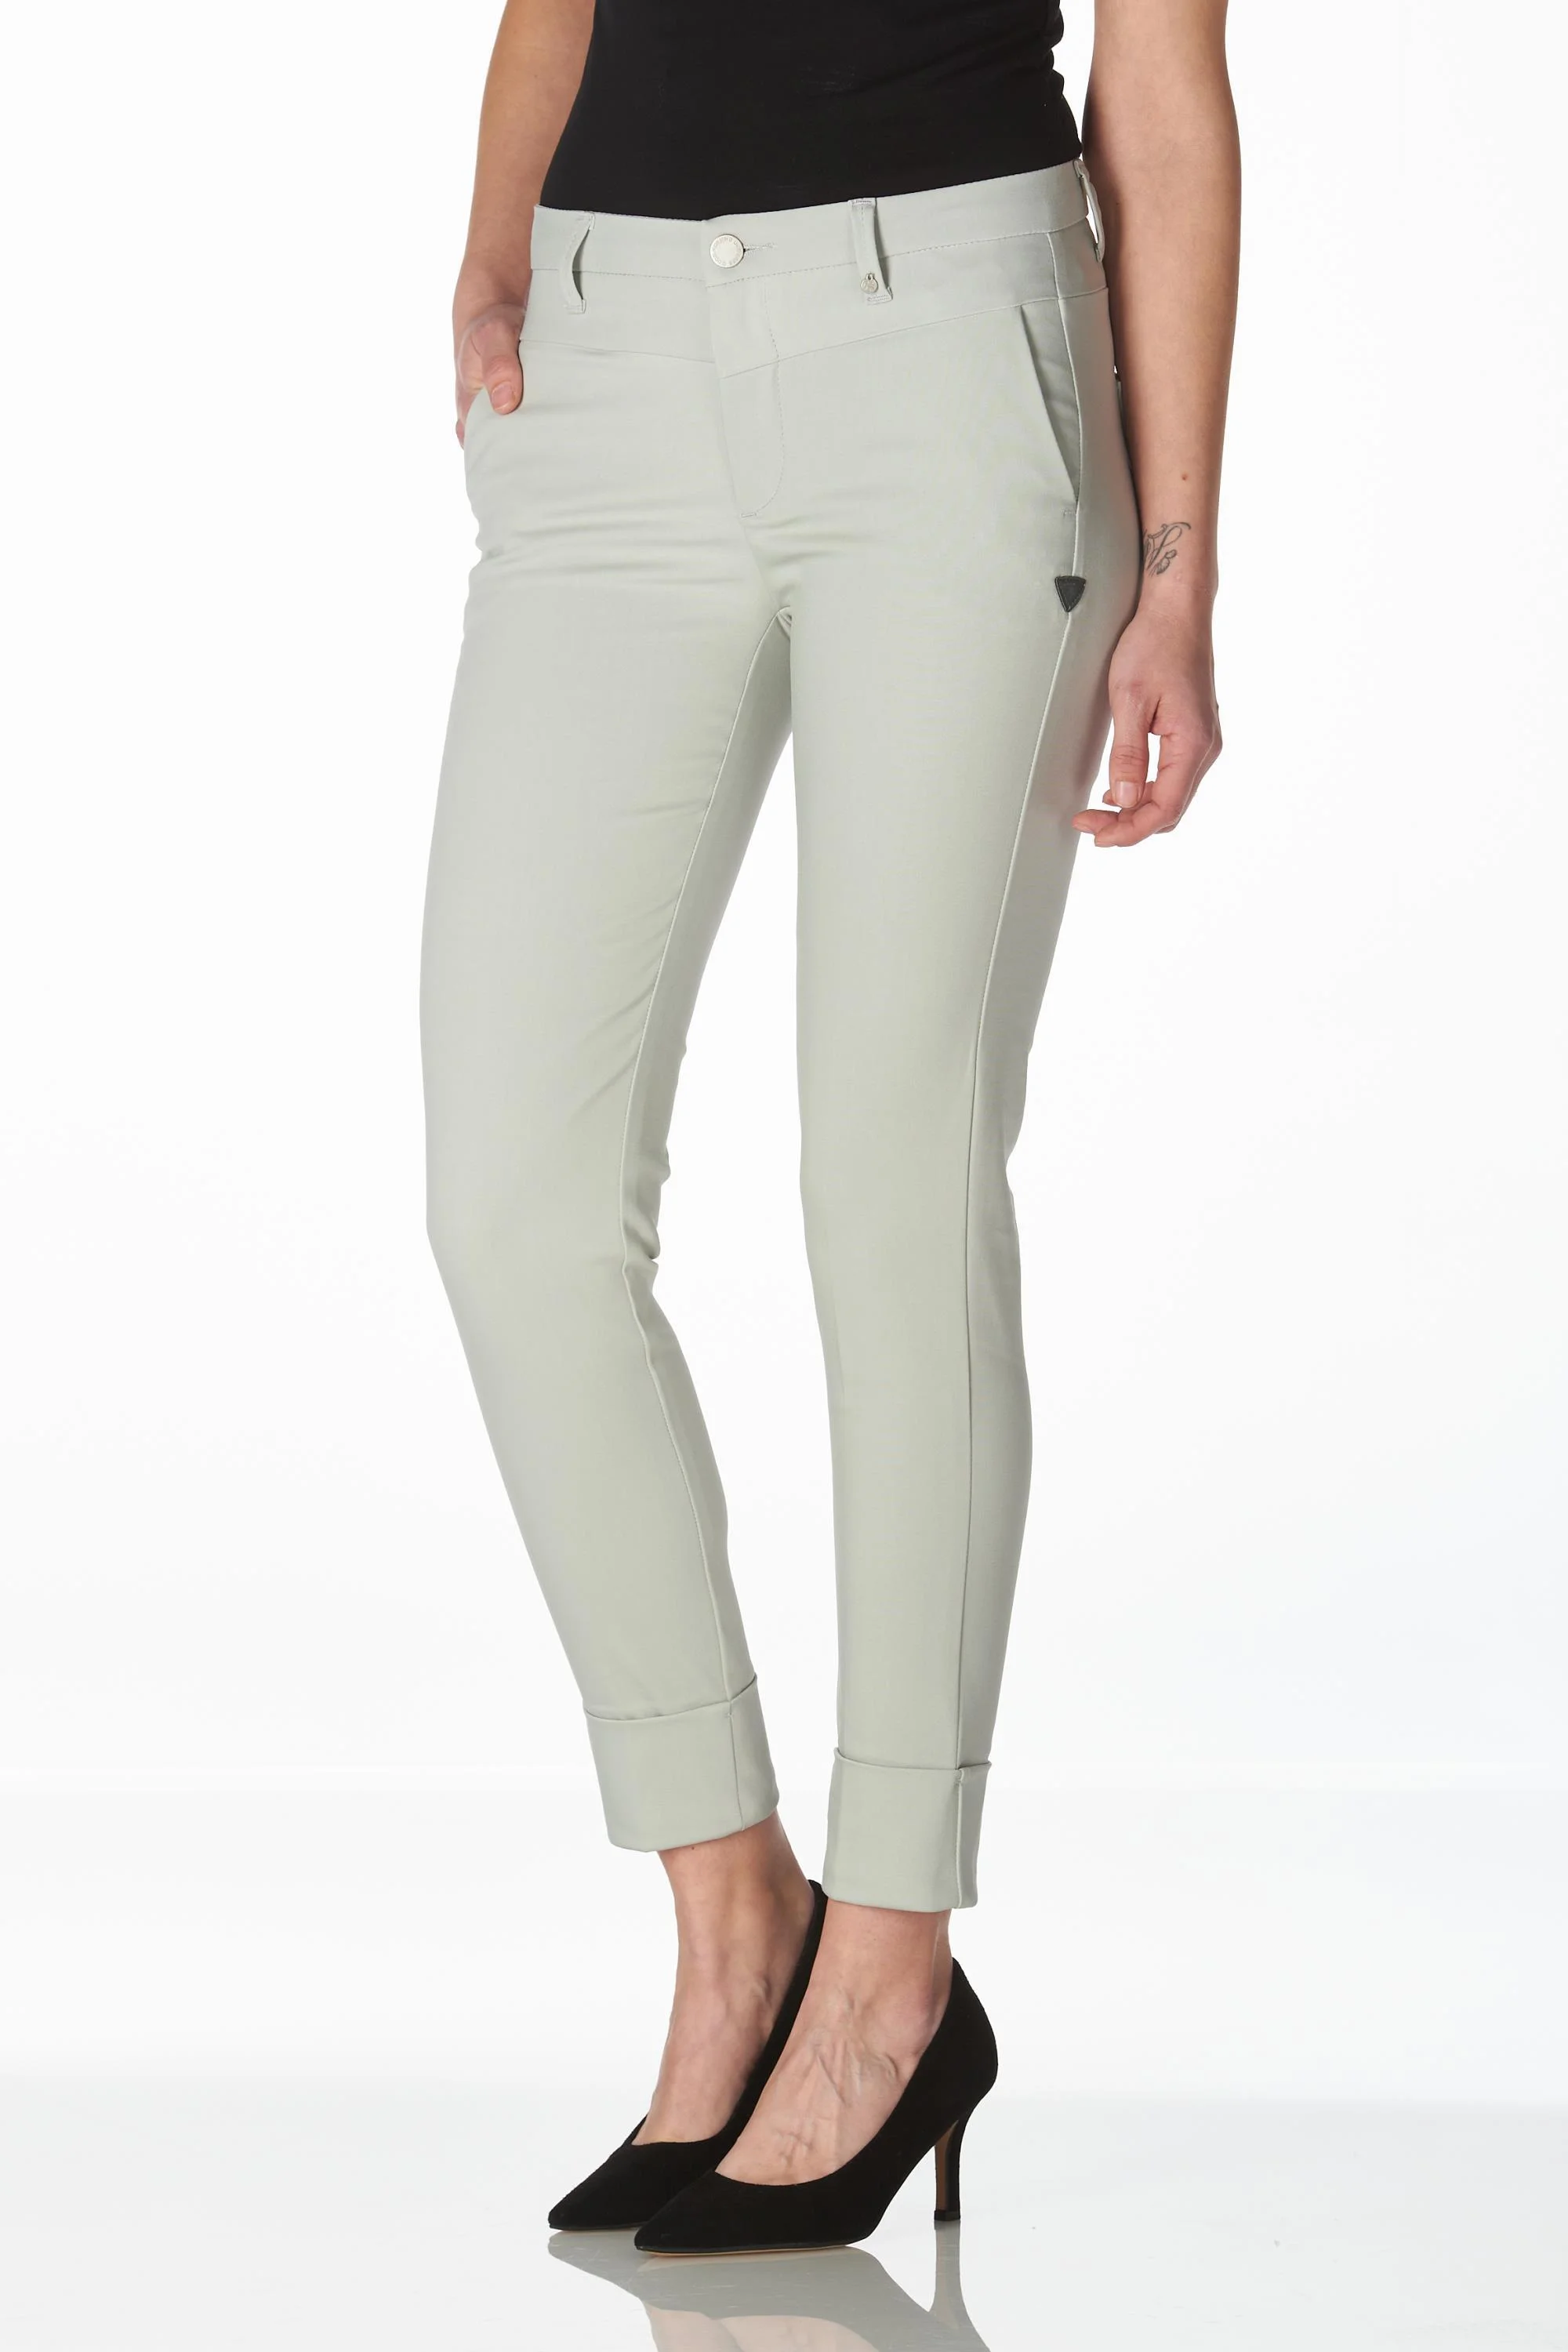 Lola ankle chino silver